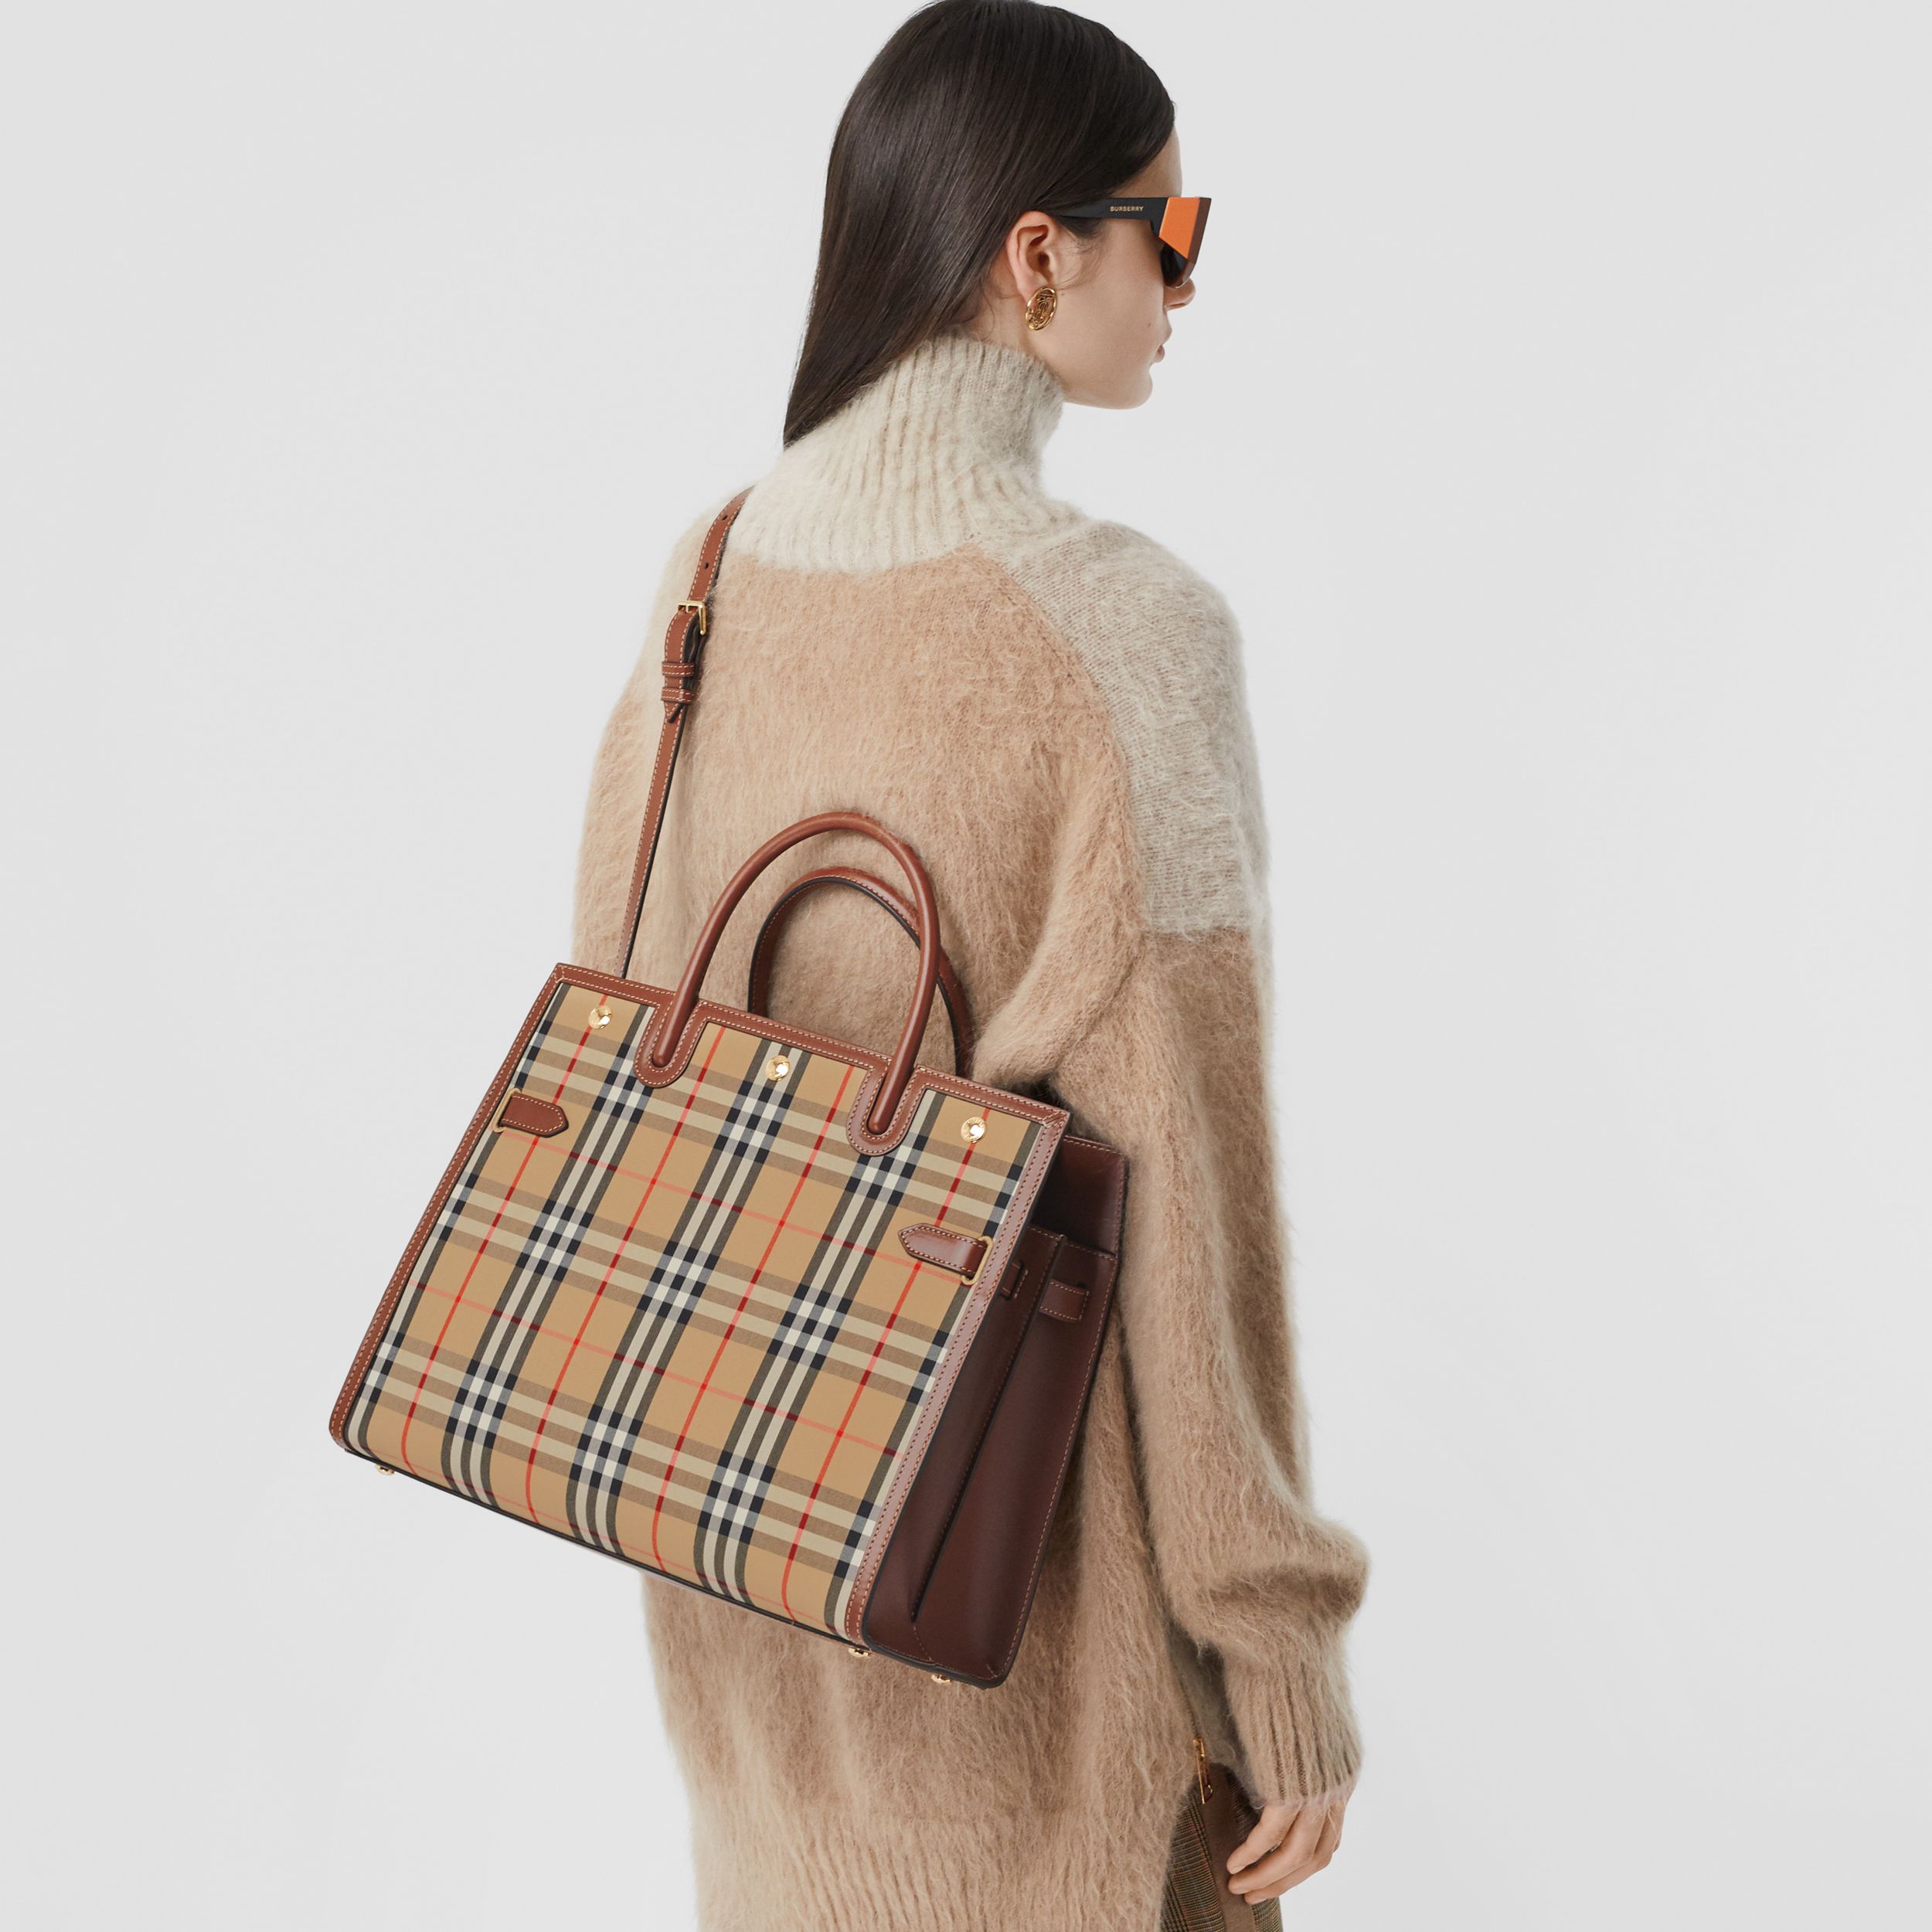 Burberry-Checked-Handbags-1 Why I Love Burberry? 4 Must-Have Items For Every Fashionista